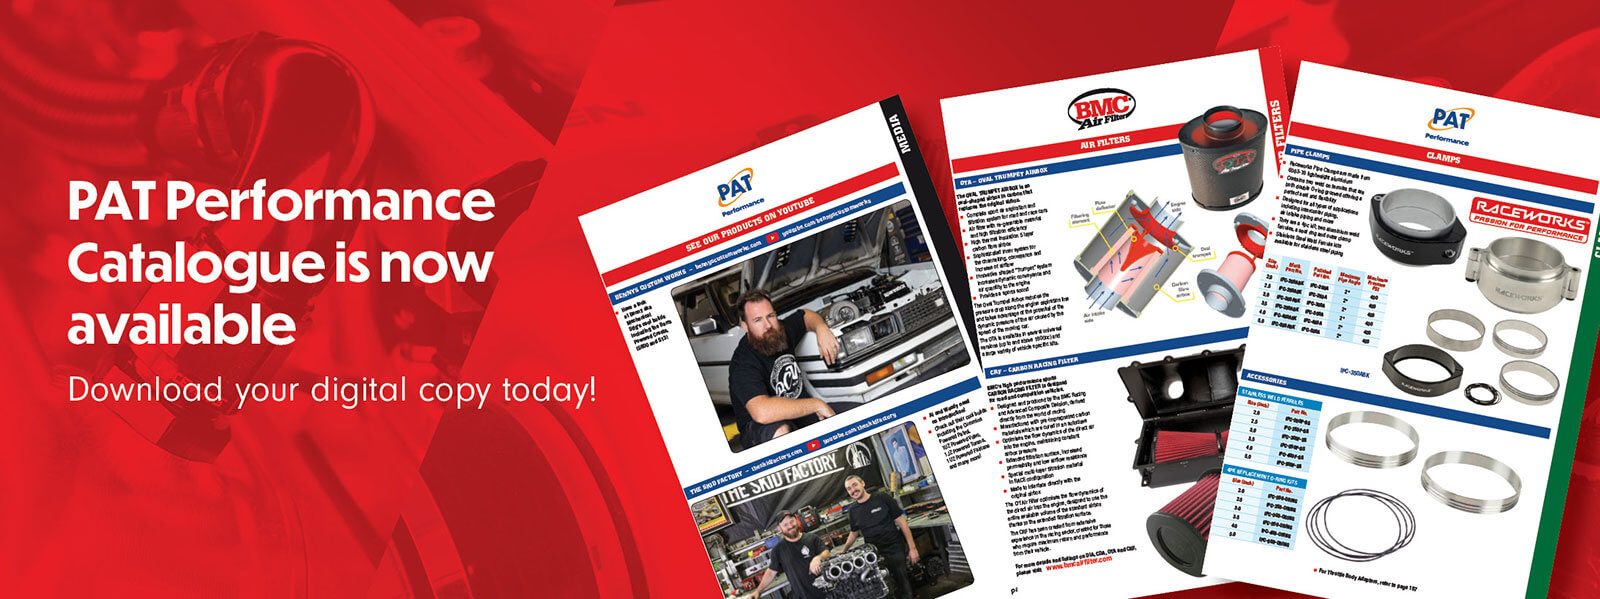 pat performance catalogue is now available